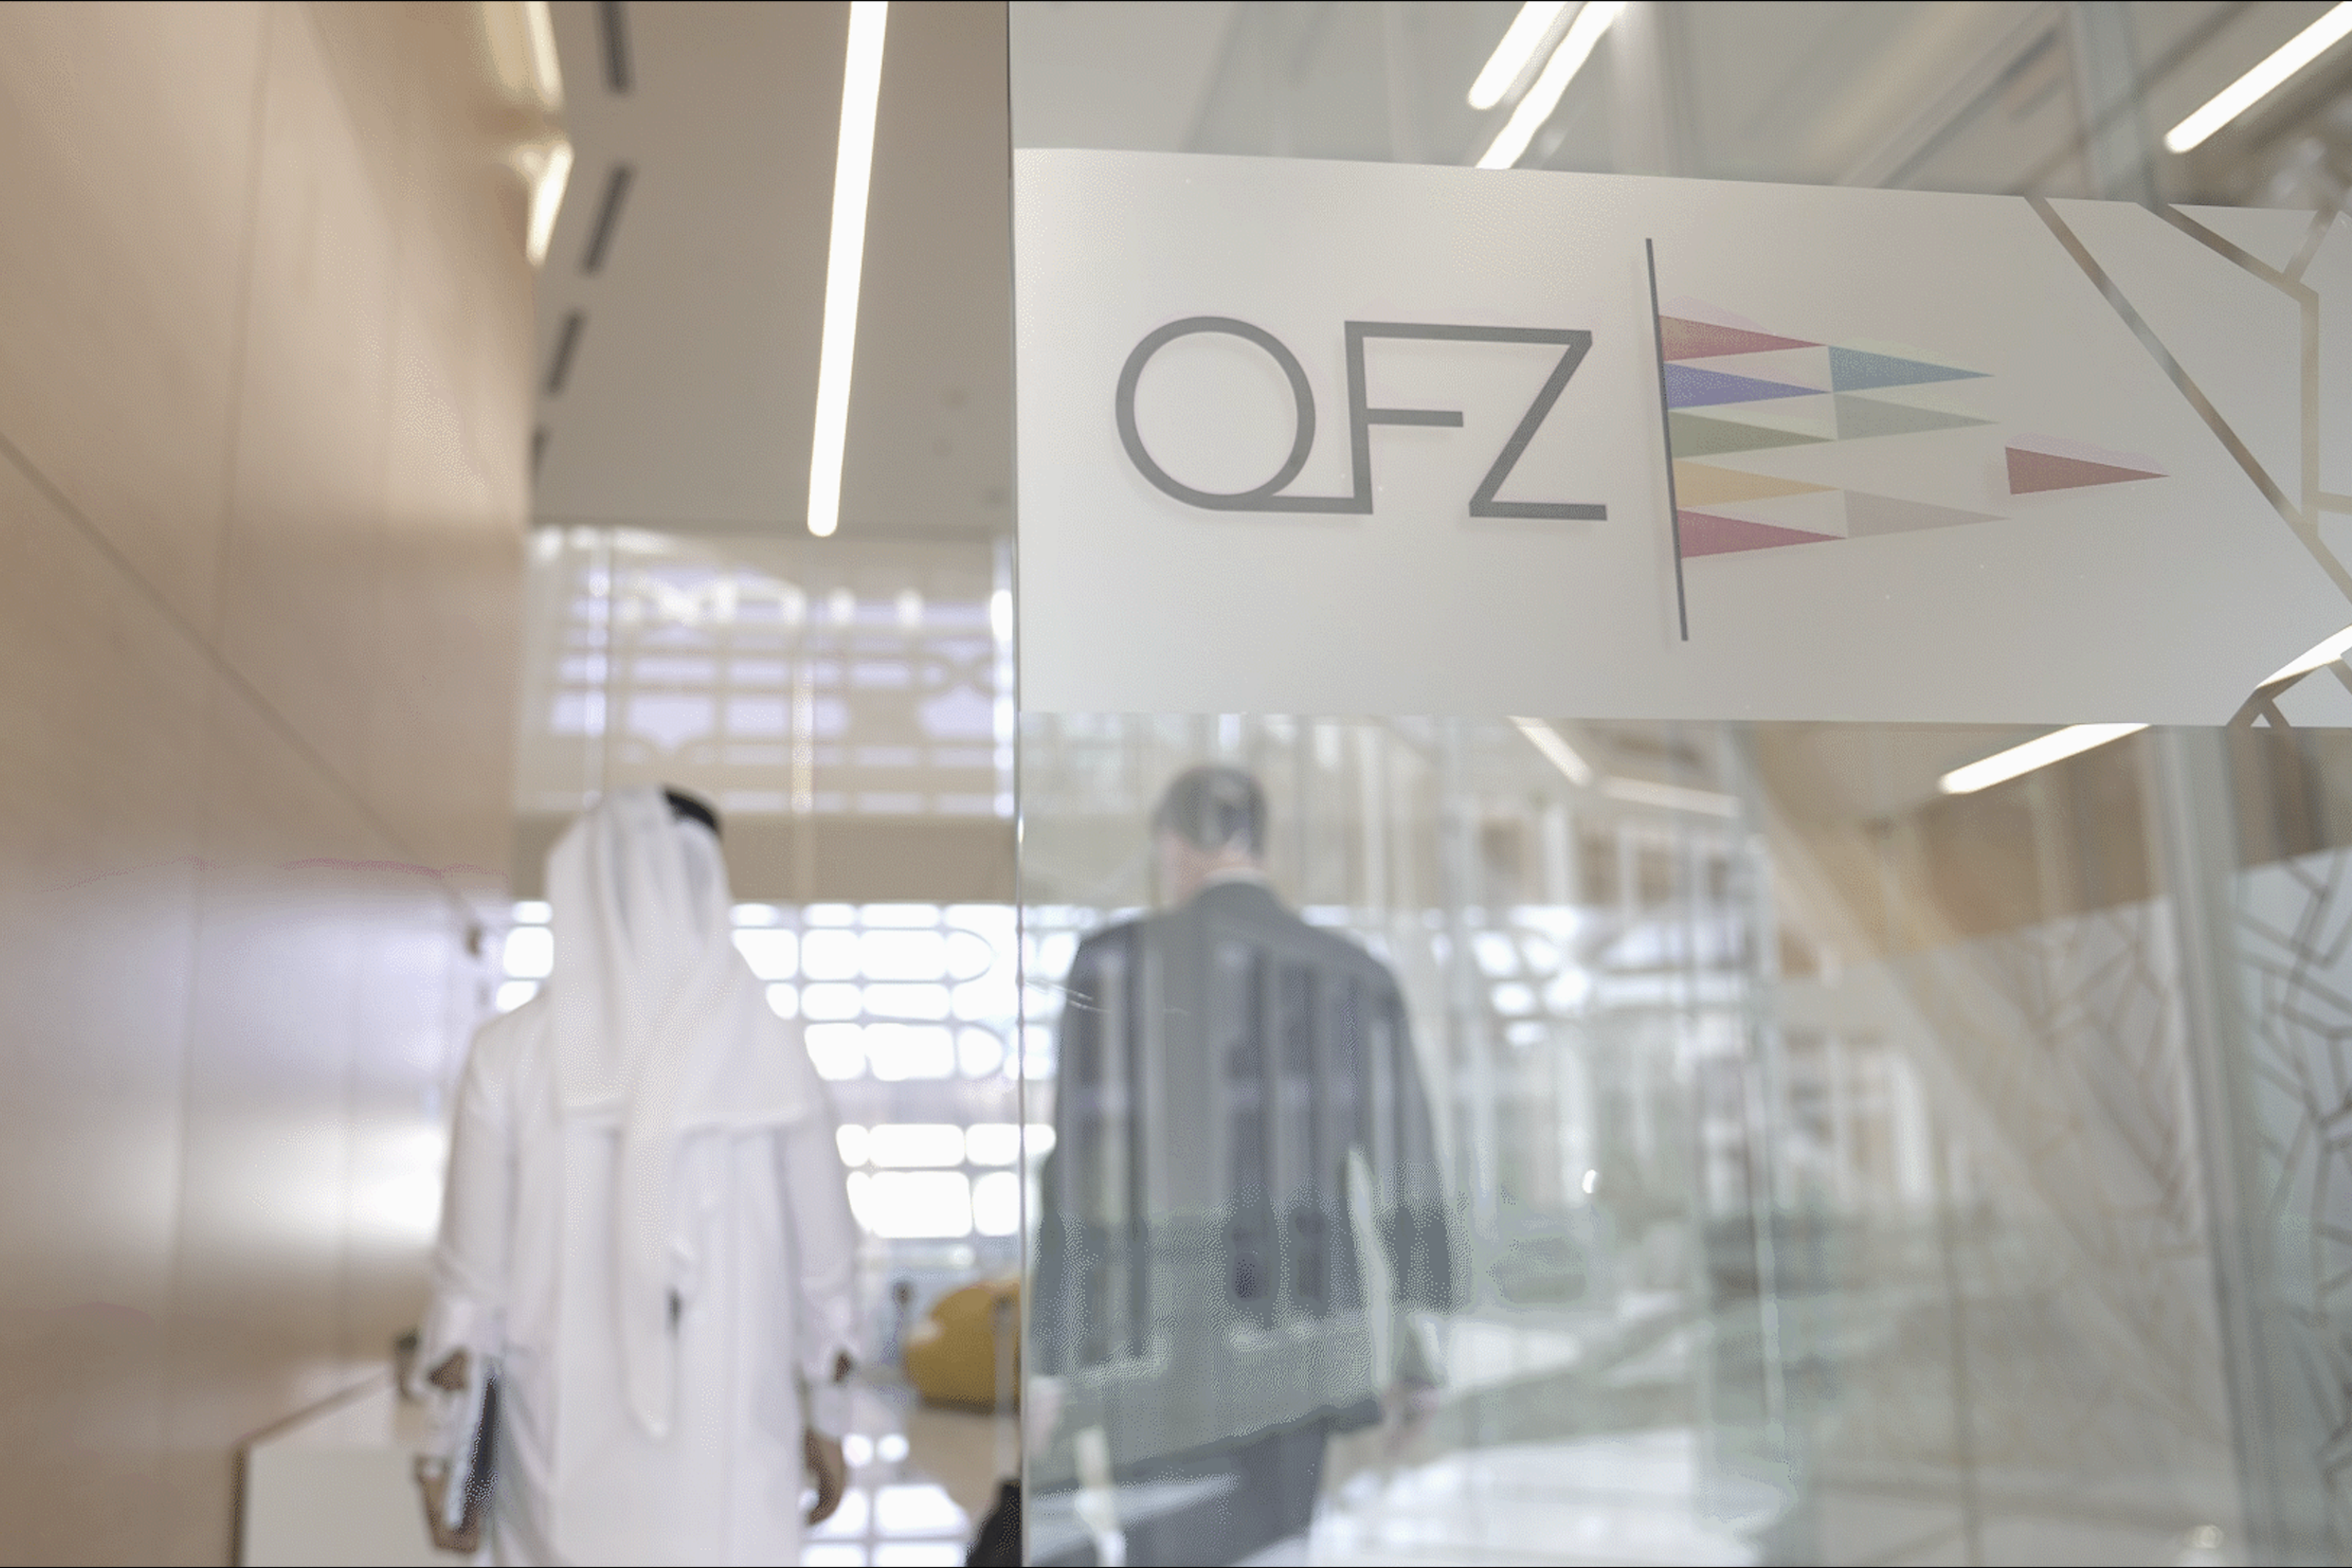 Blurred image of two people in a office, behind opaque glass wall with Qatar Free Zones logo